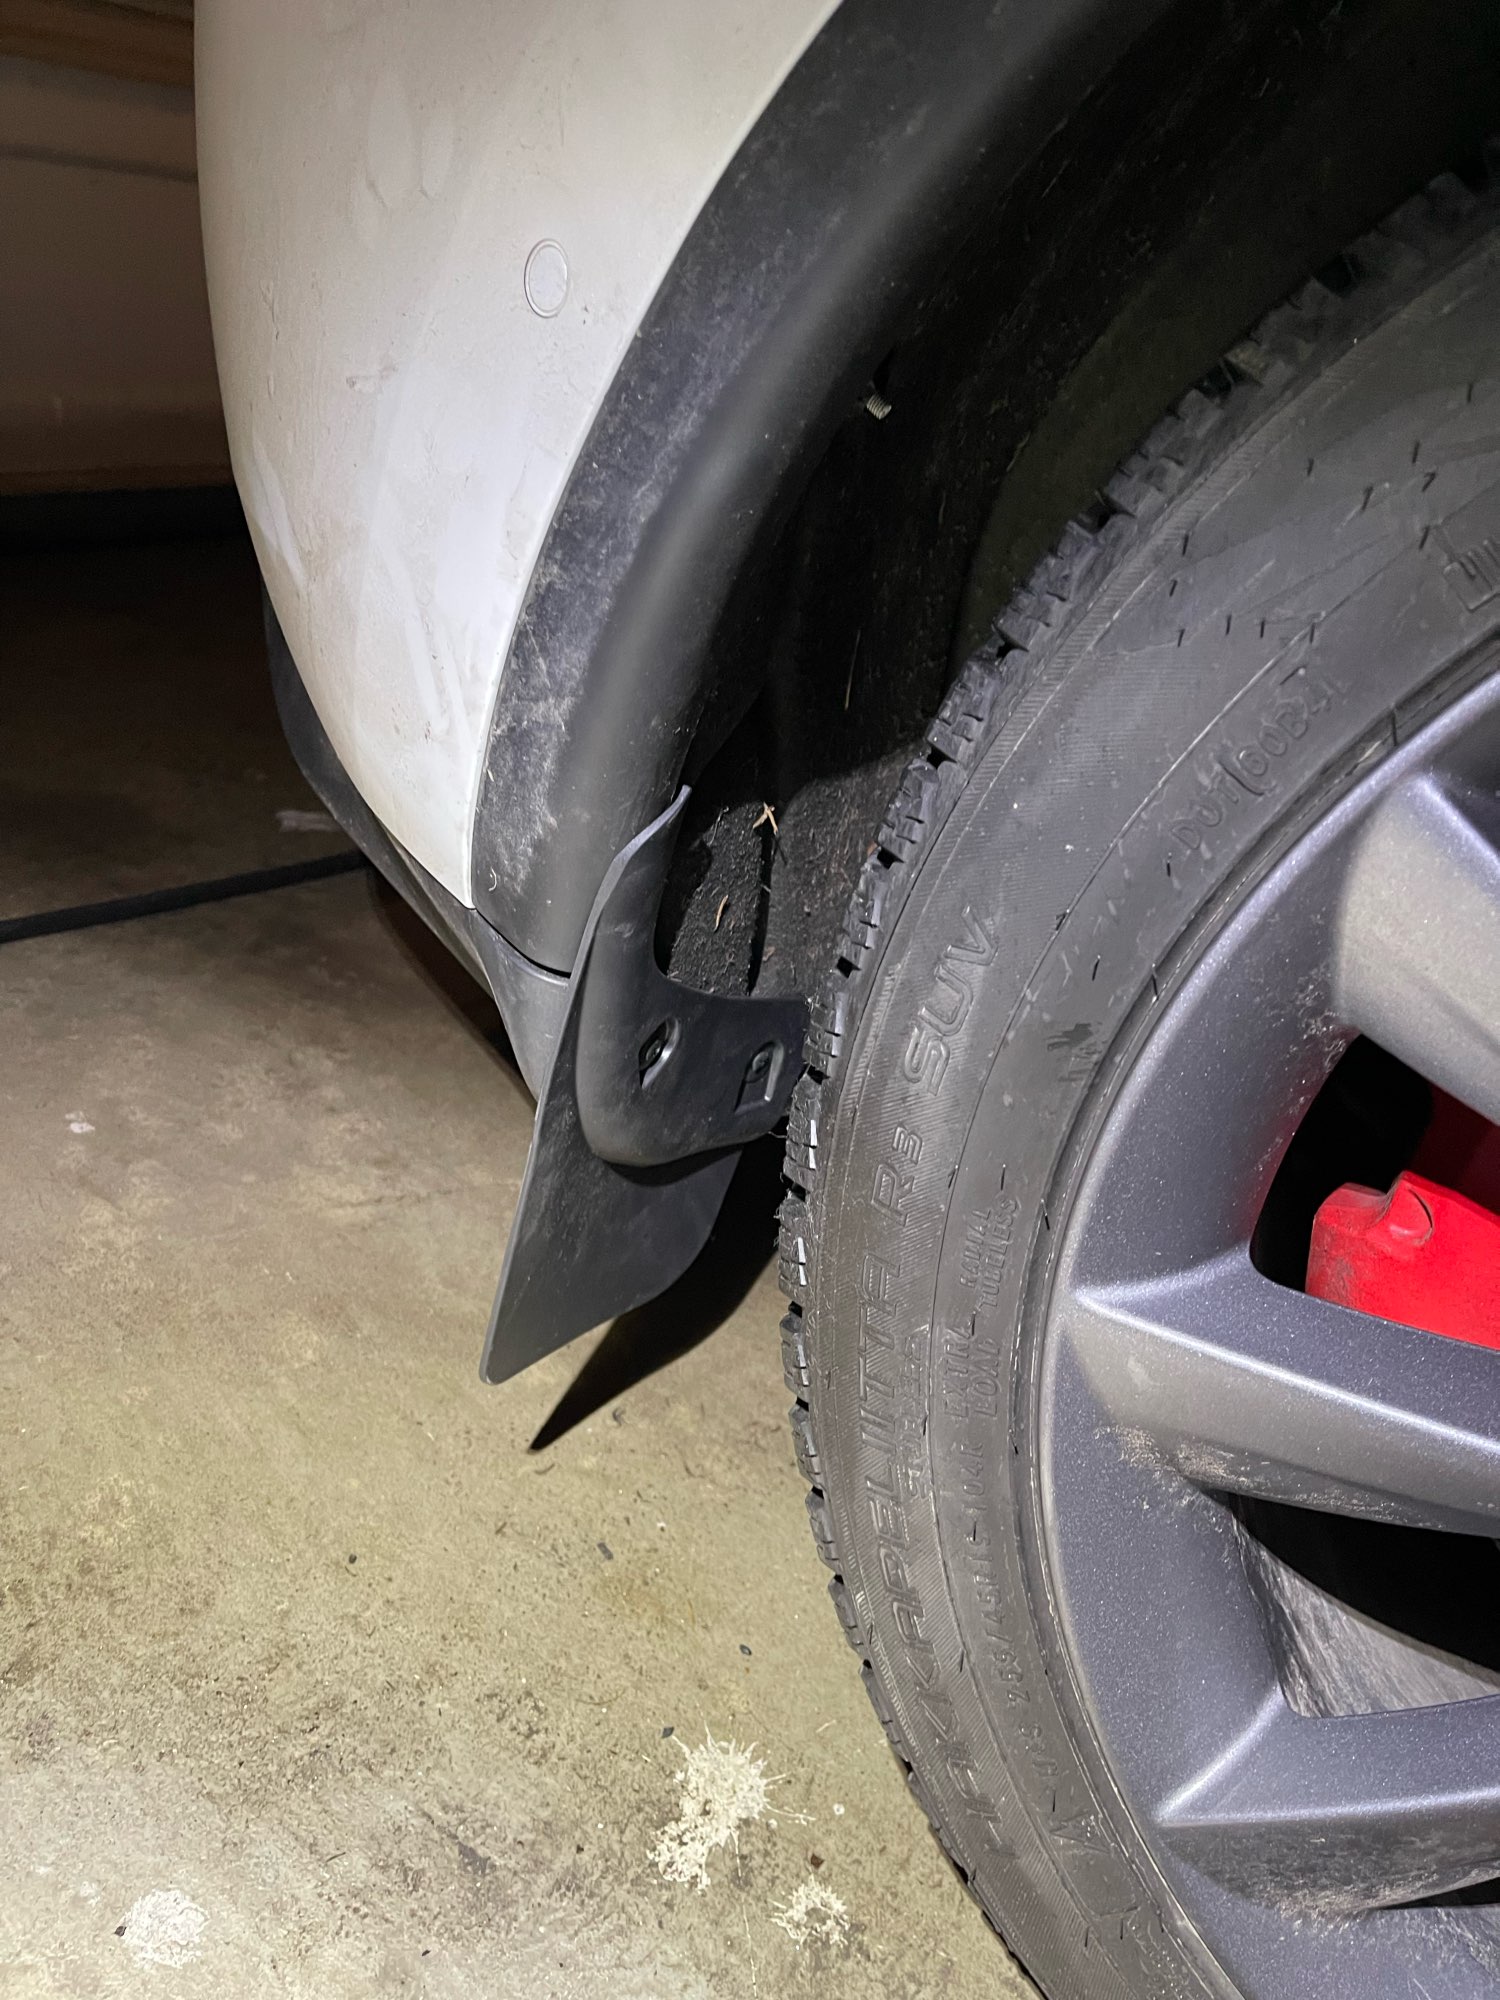 Rally Armor Mud Flaps Install and Review - Tesla Model Y or 3